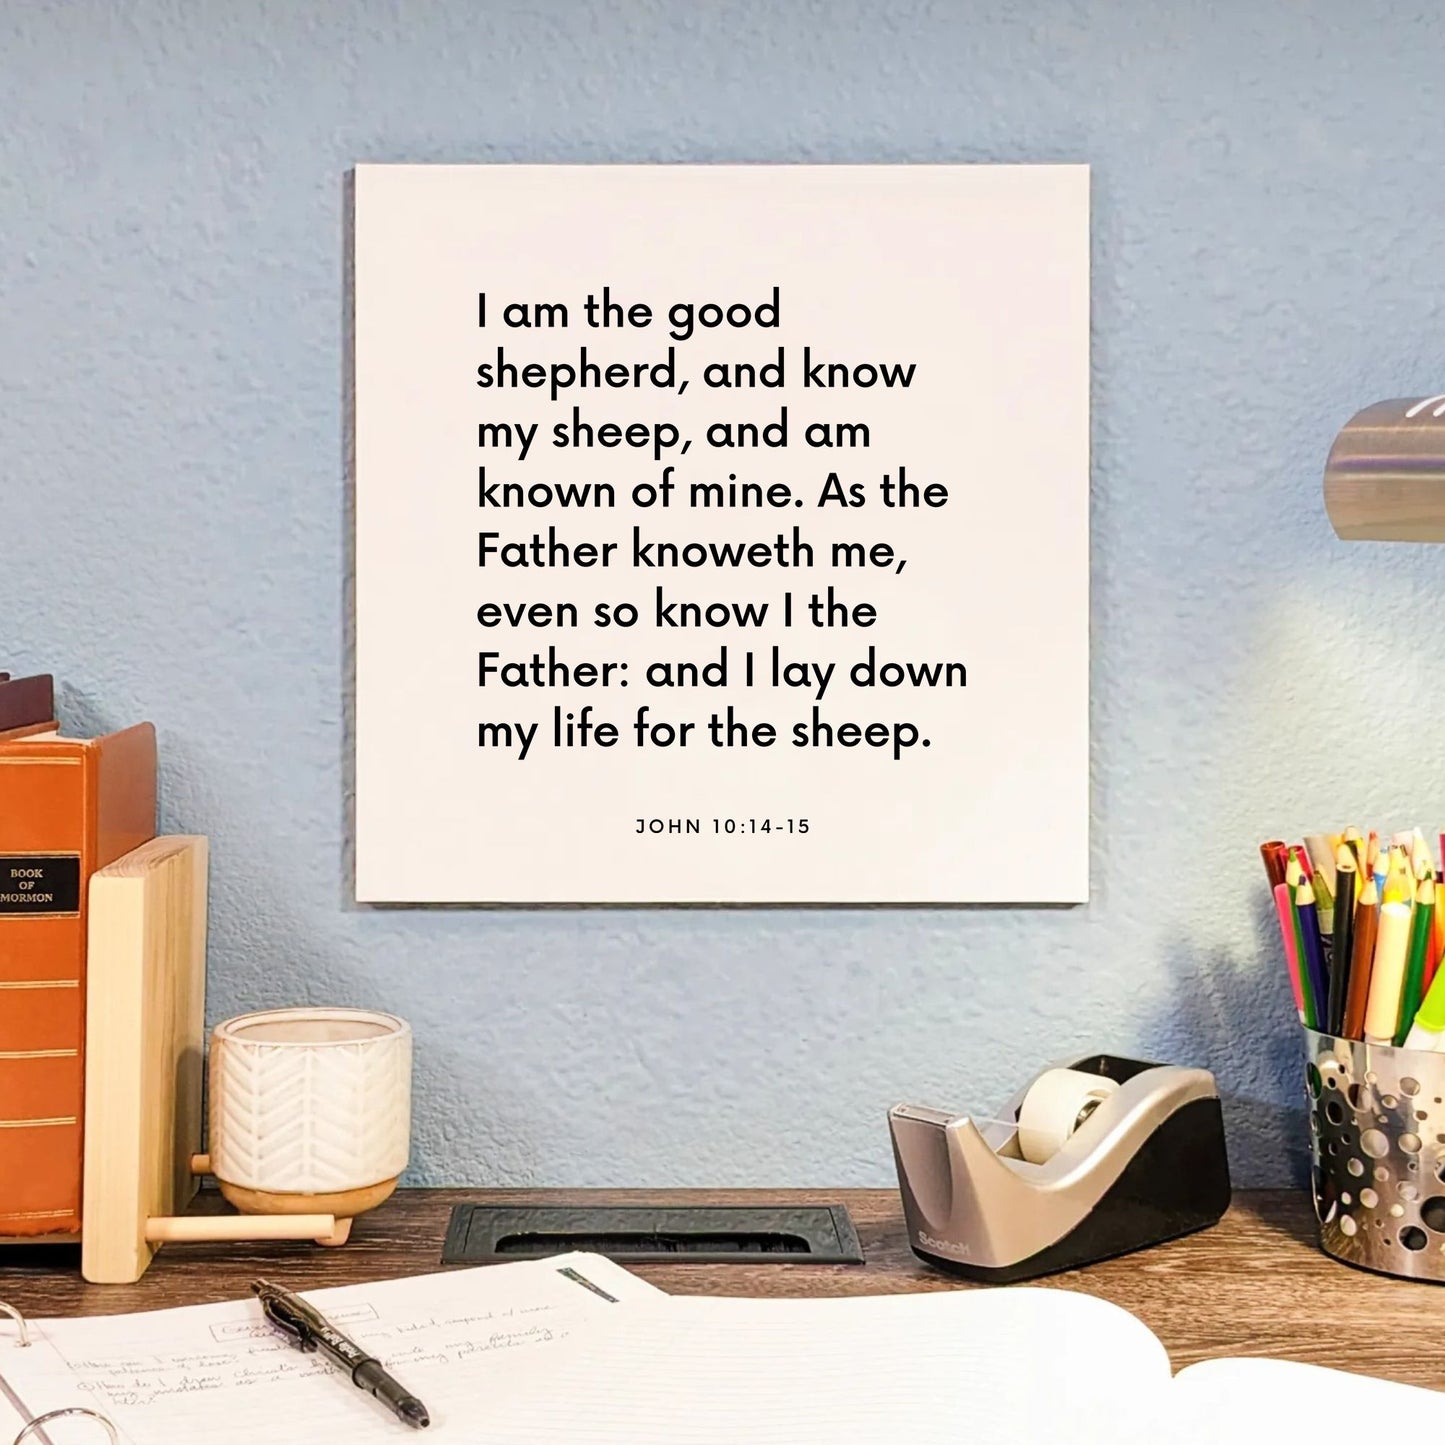 Desk mouting of the scripture tile for John 10:14-15 - "I am the good shepherd, and know my sheep"